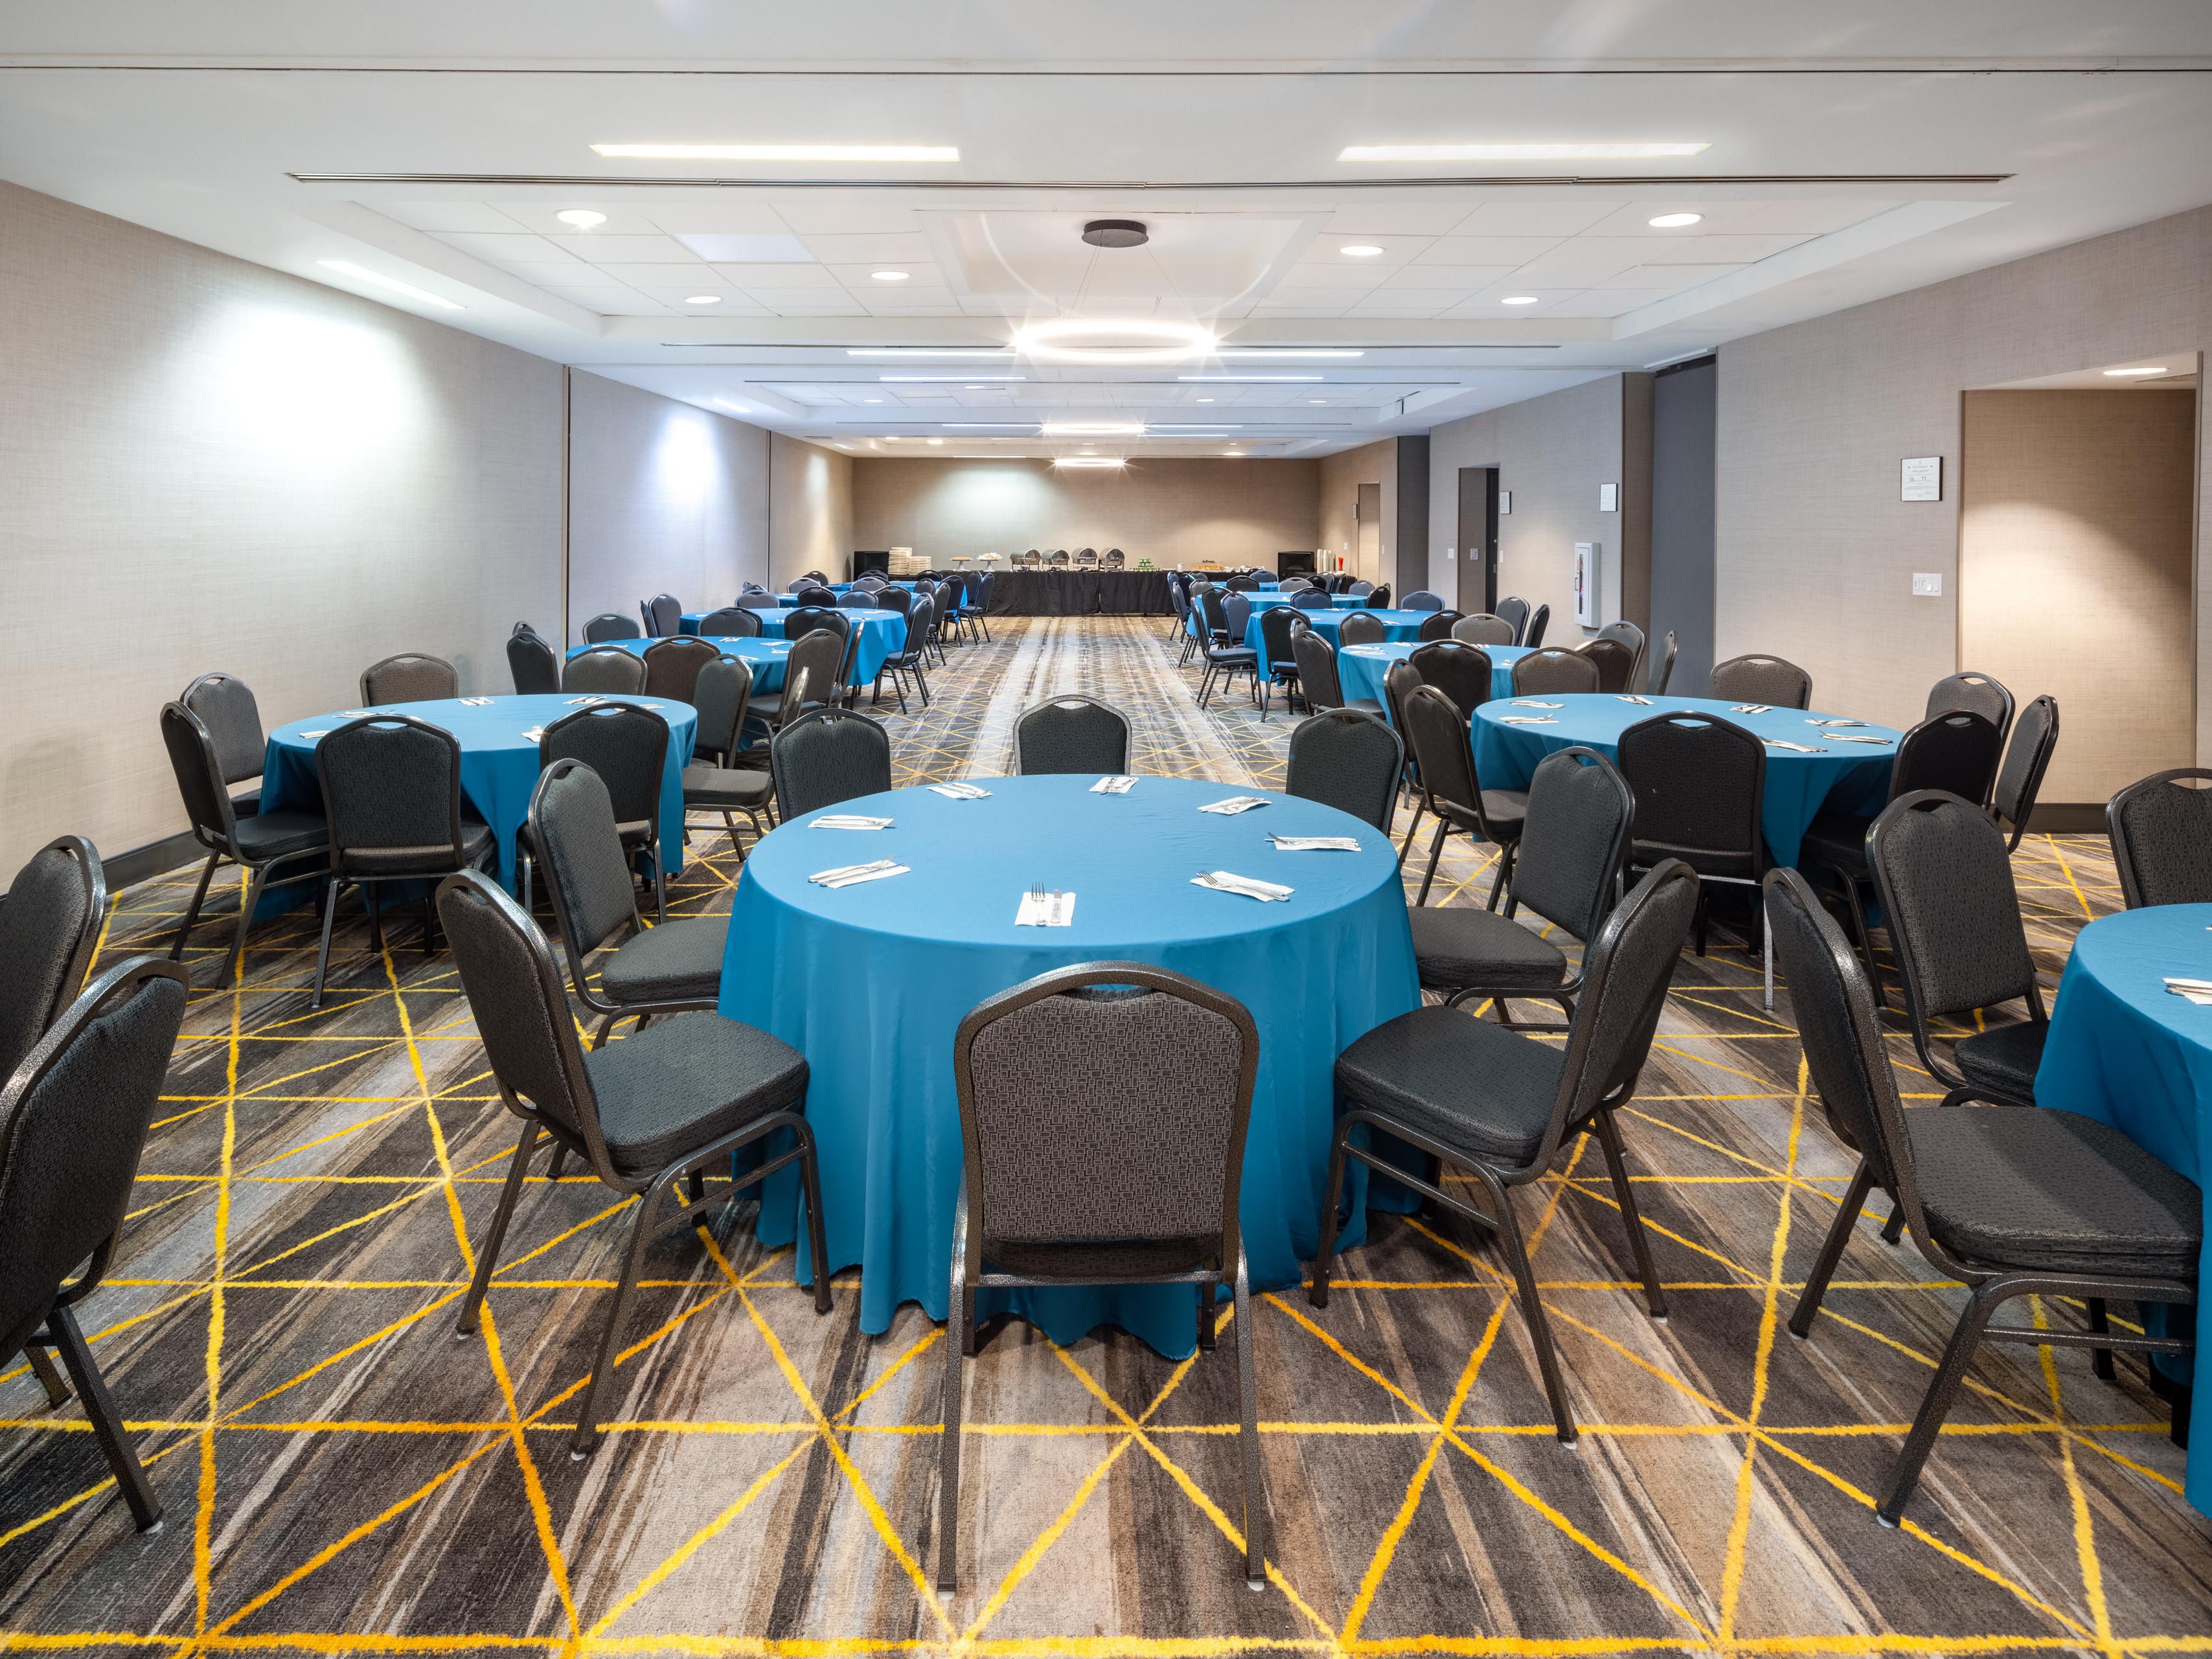 From business meetings, to weddings and family reunions, being together matters. With 10,000 square feet of flexible meeting space, we make sure events of all sizes and types are a success. 
EMAIL: sanshine@holidayinnpoughkeepsie.com
CALL: 845-462-4600 